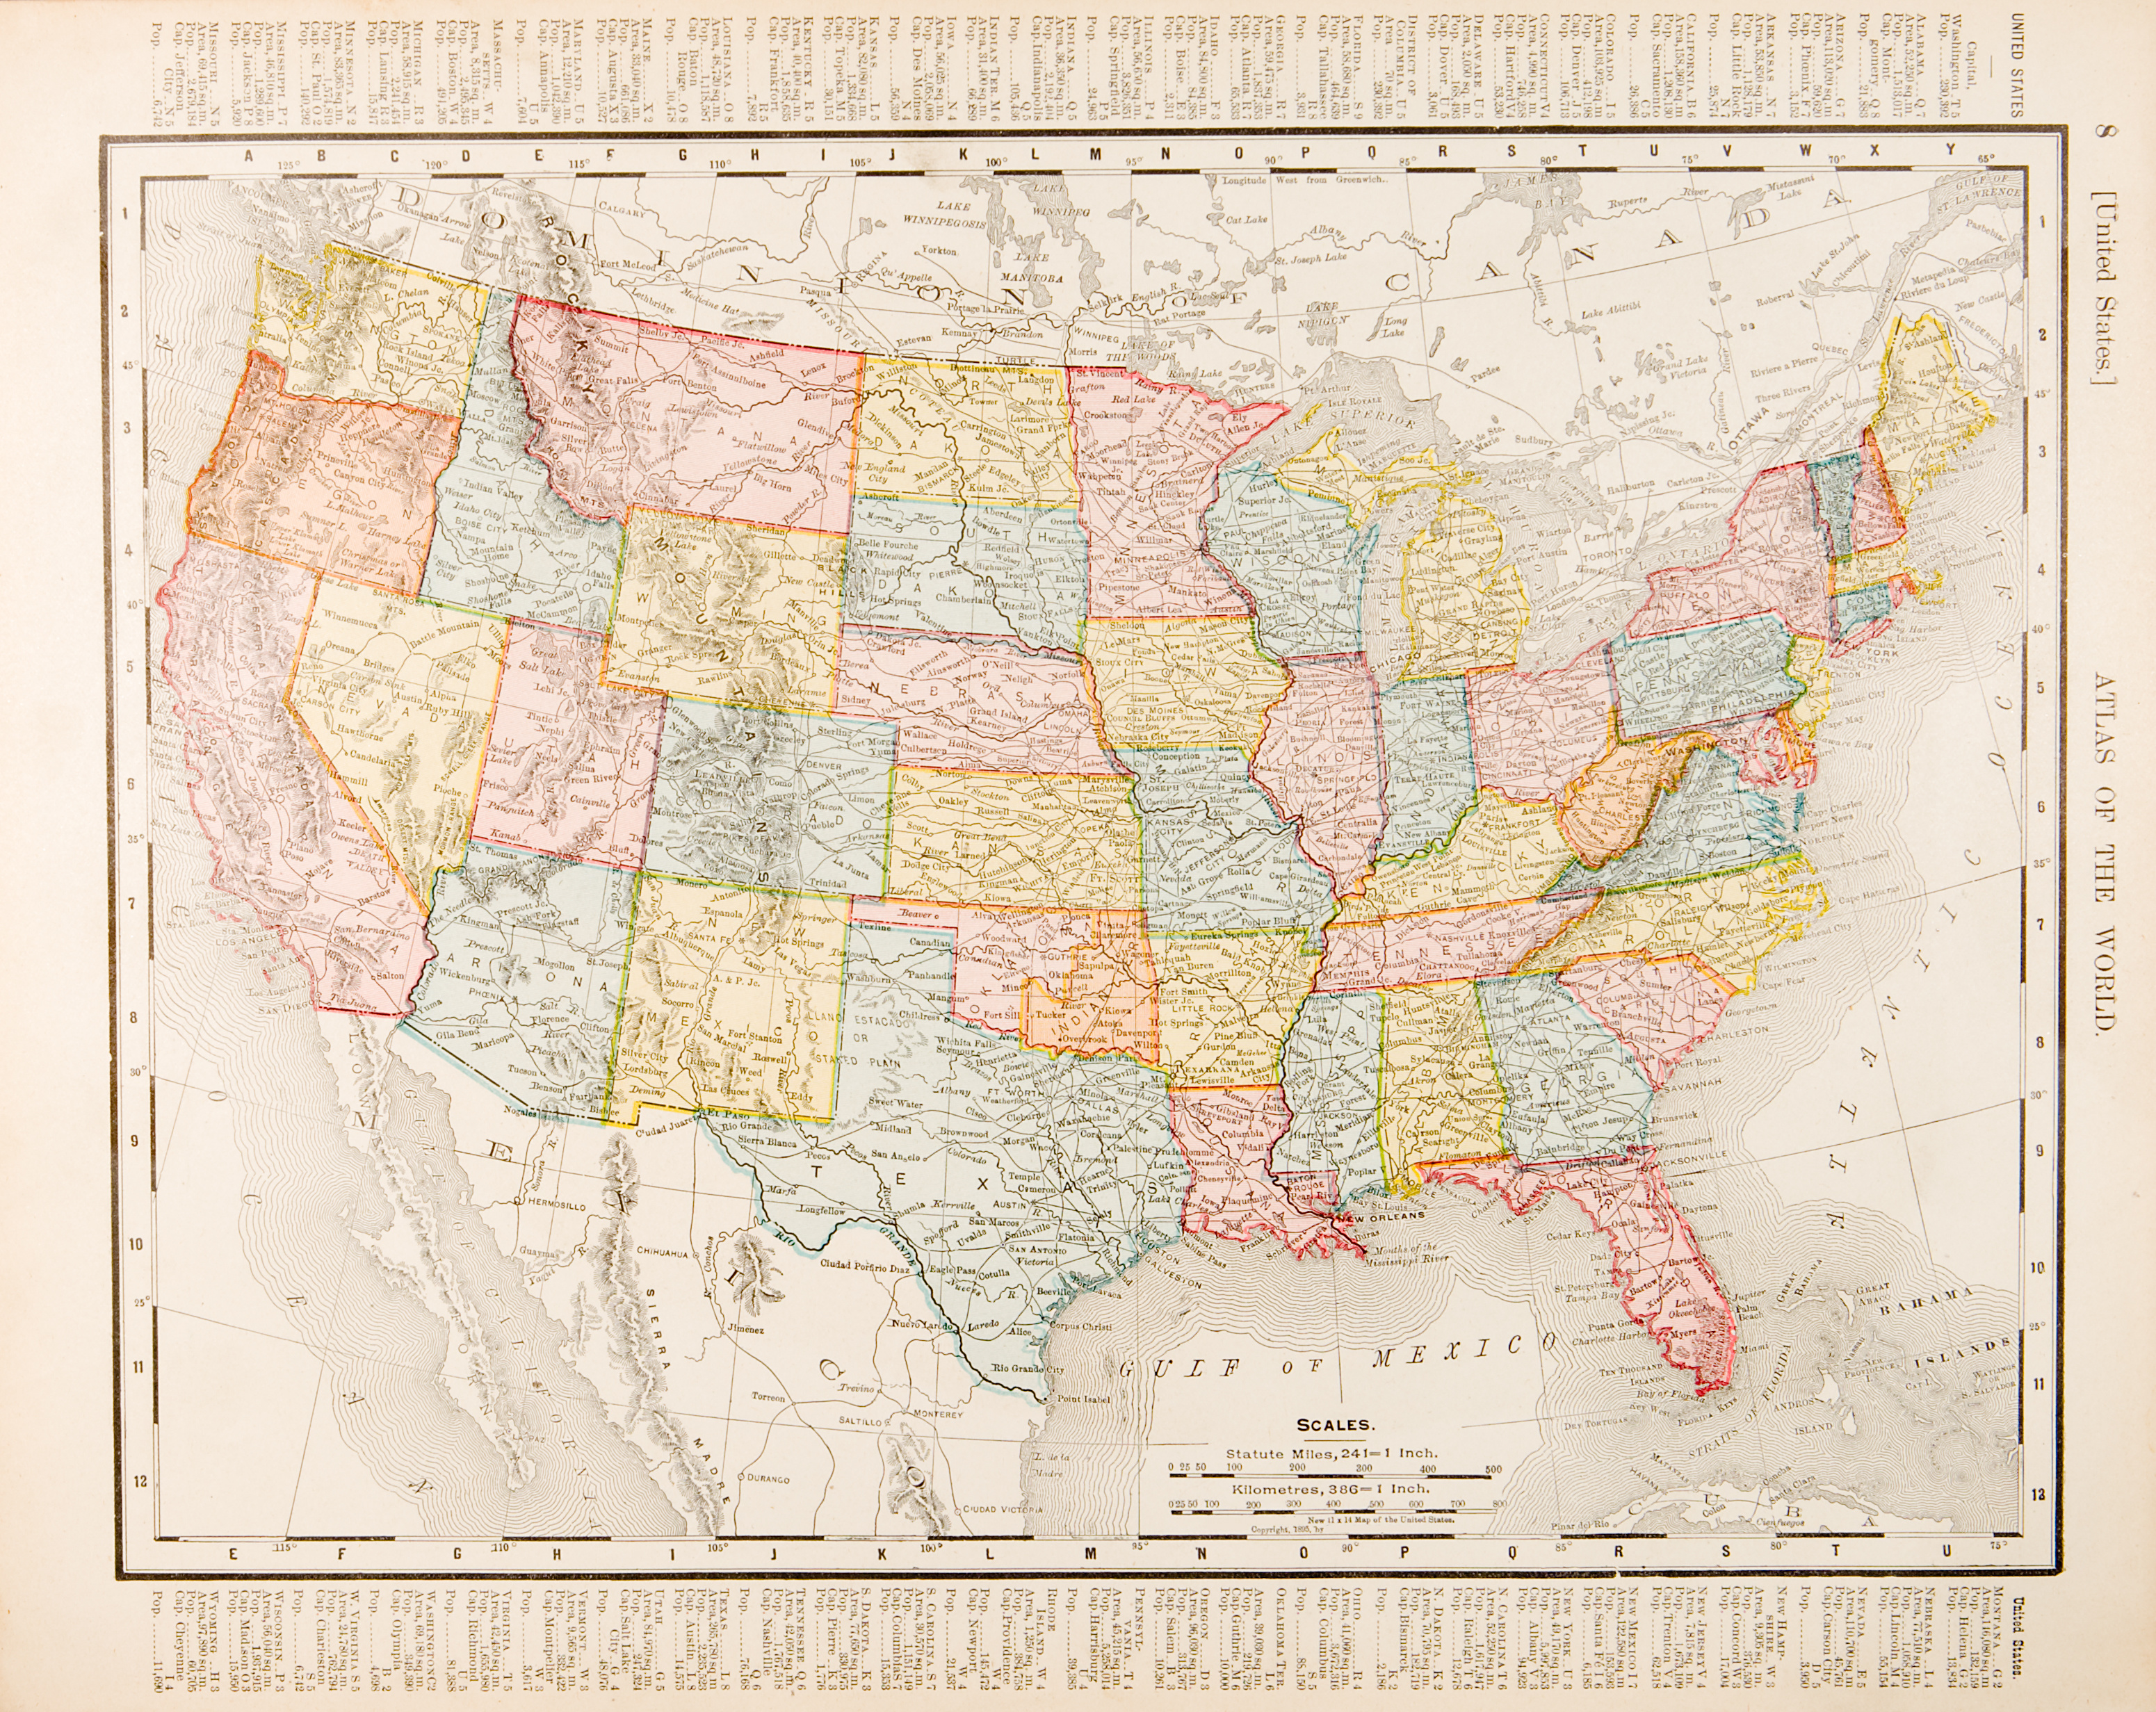 Antique Vintage Color Map United States of America.